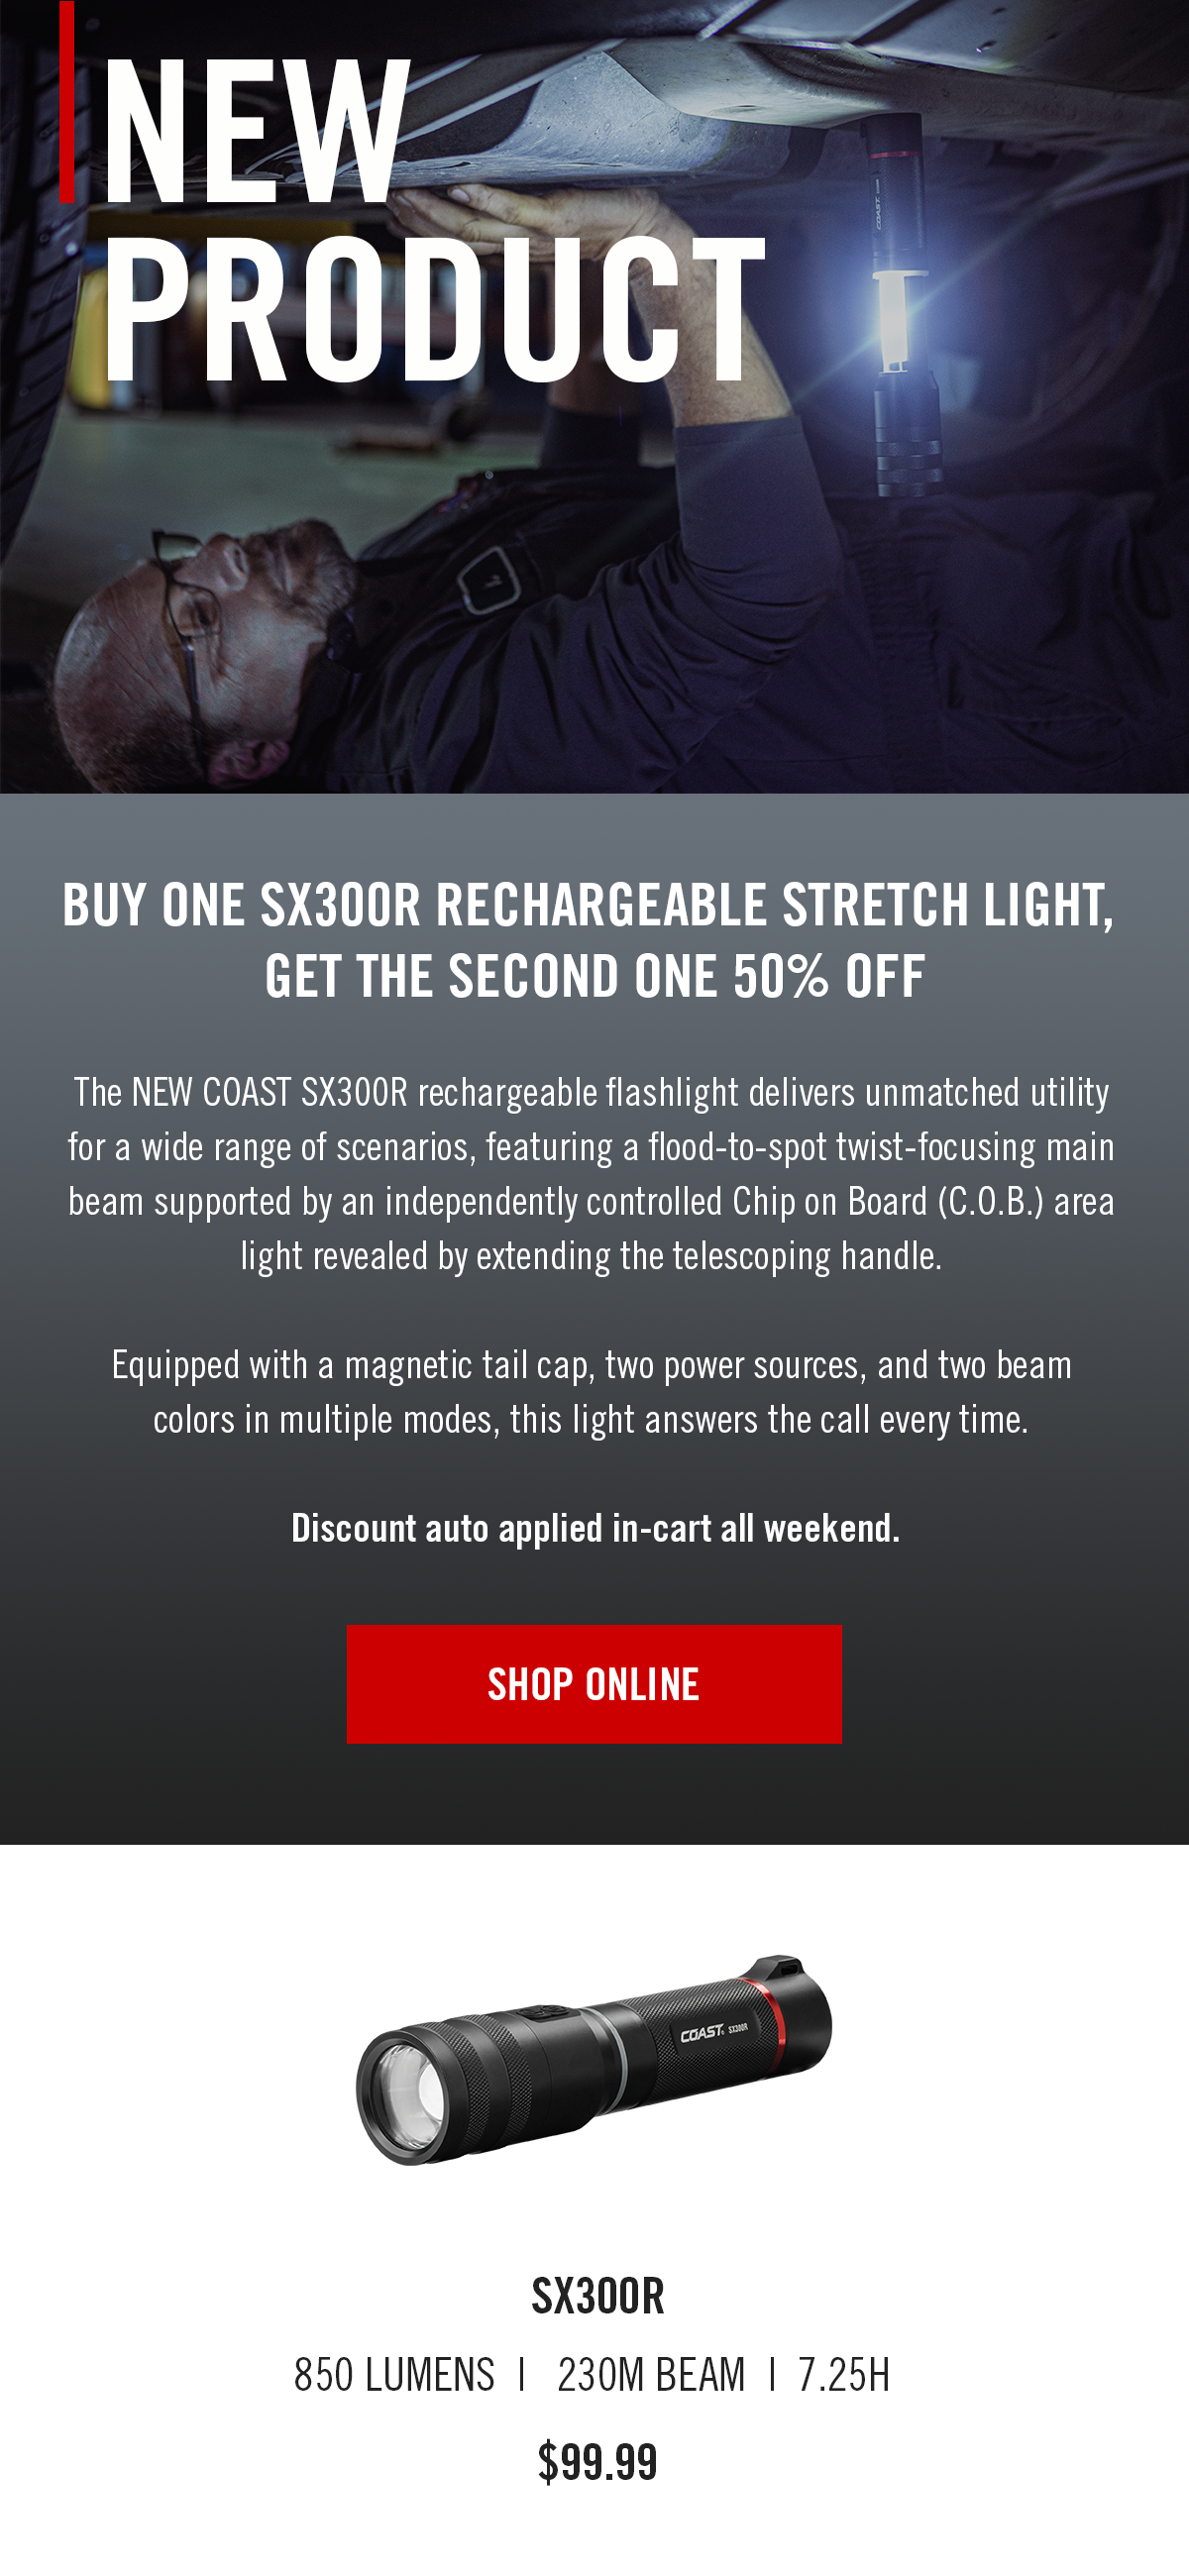 The brand new COAST SX300R Stretch Light. Buy one, get one 50% off all weekend.